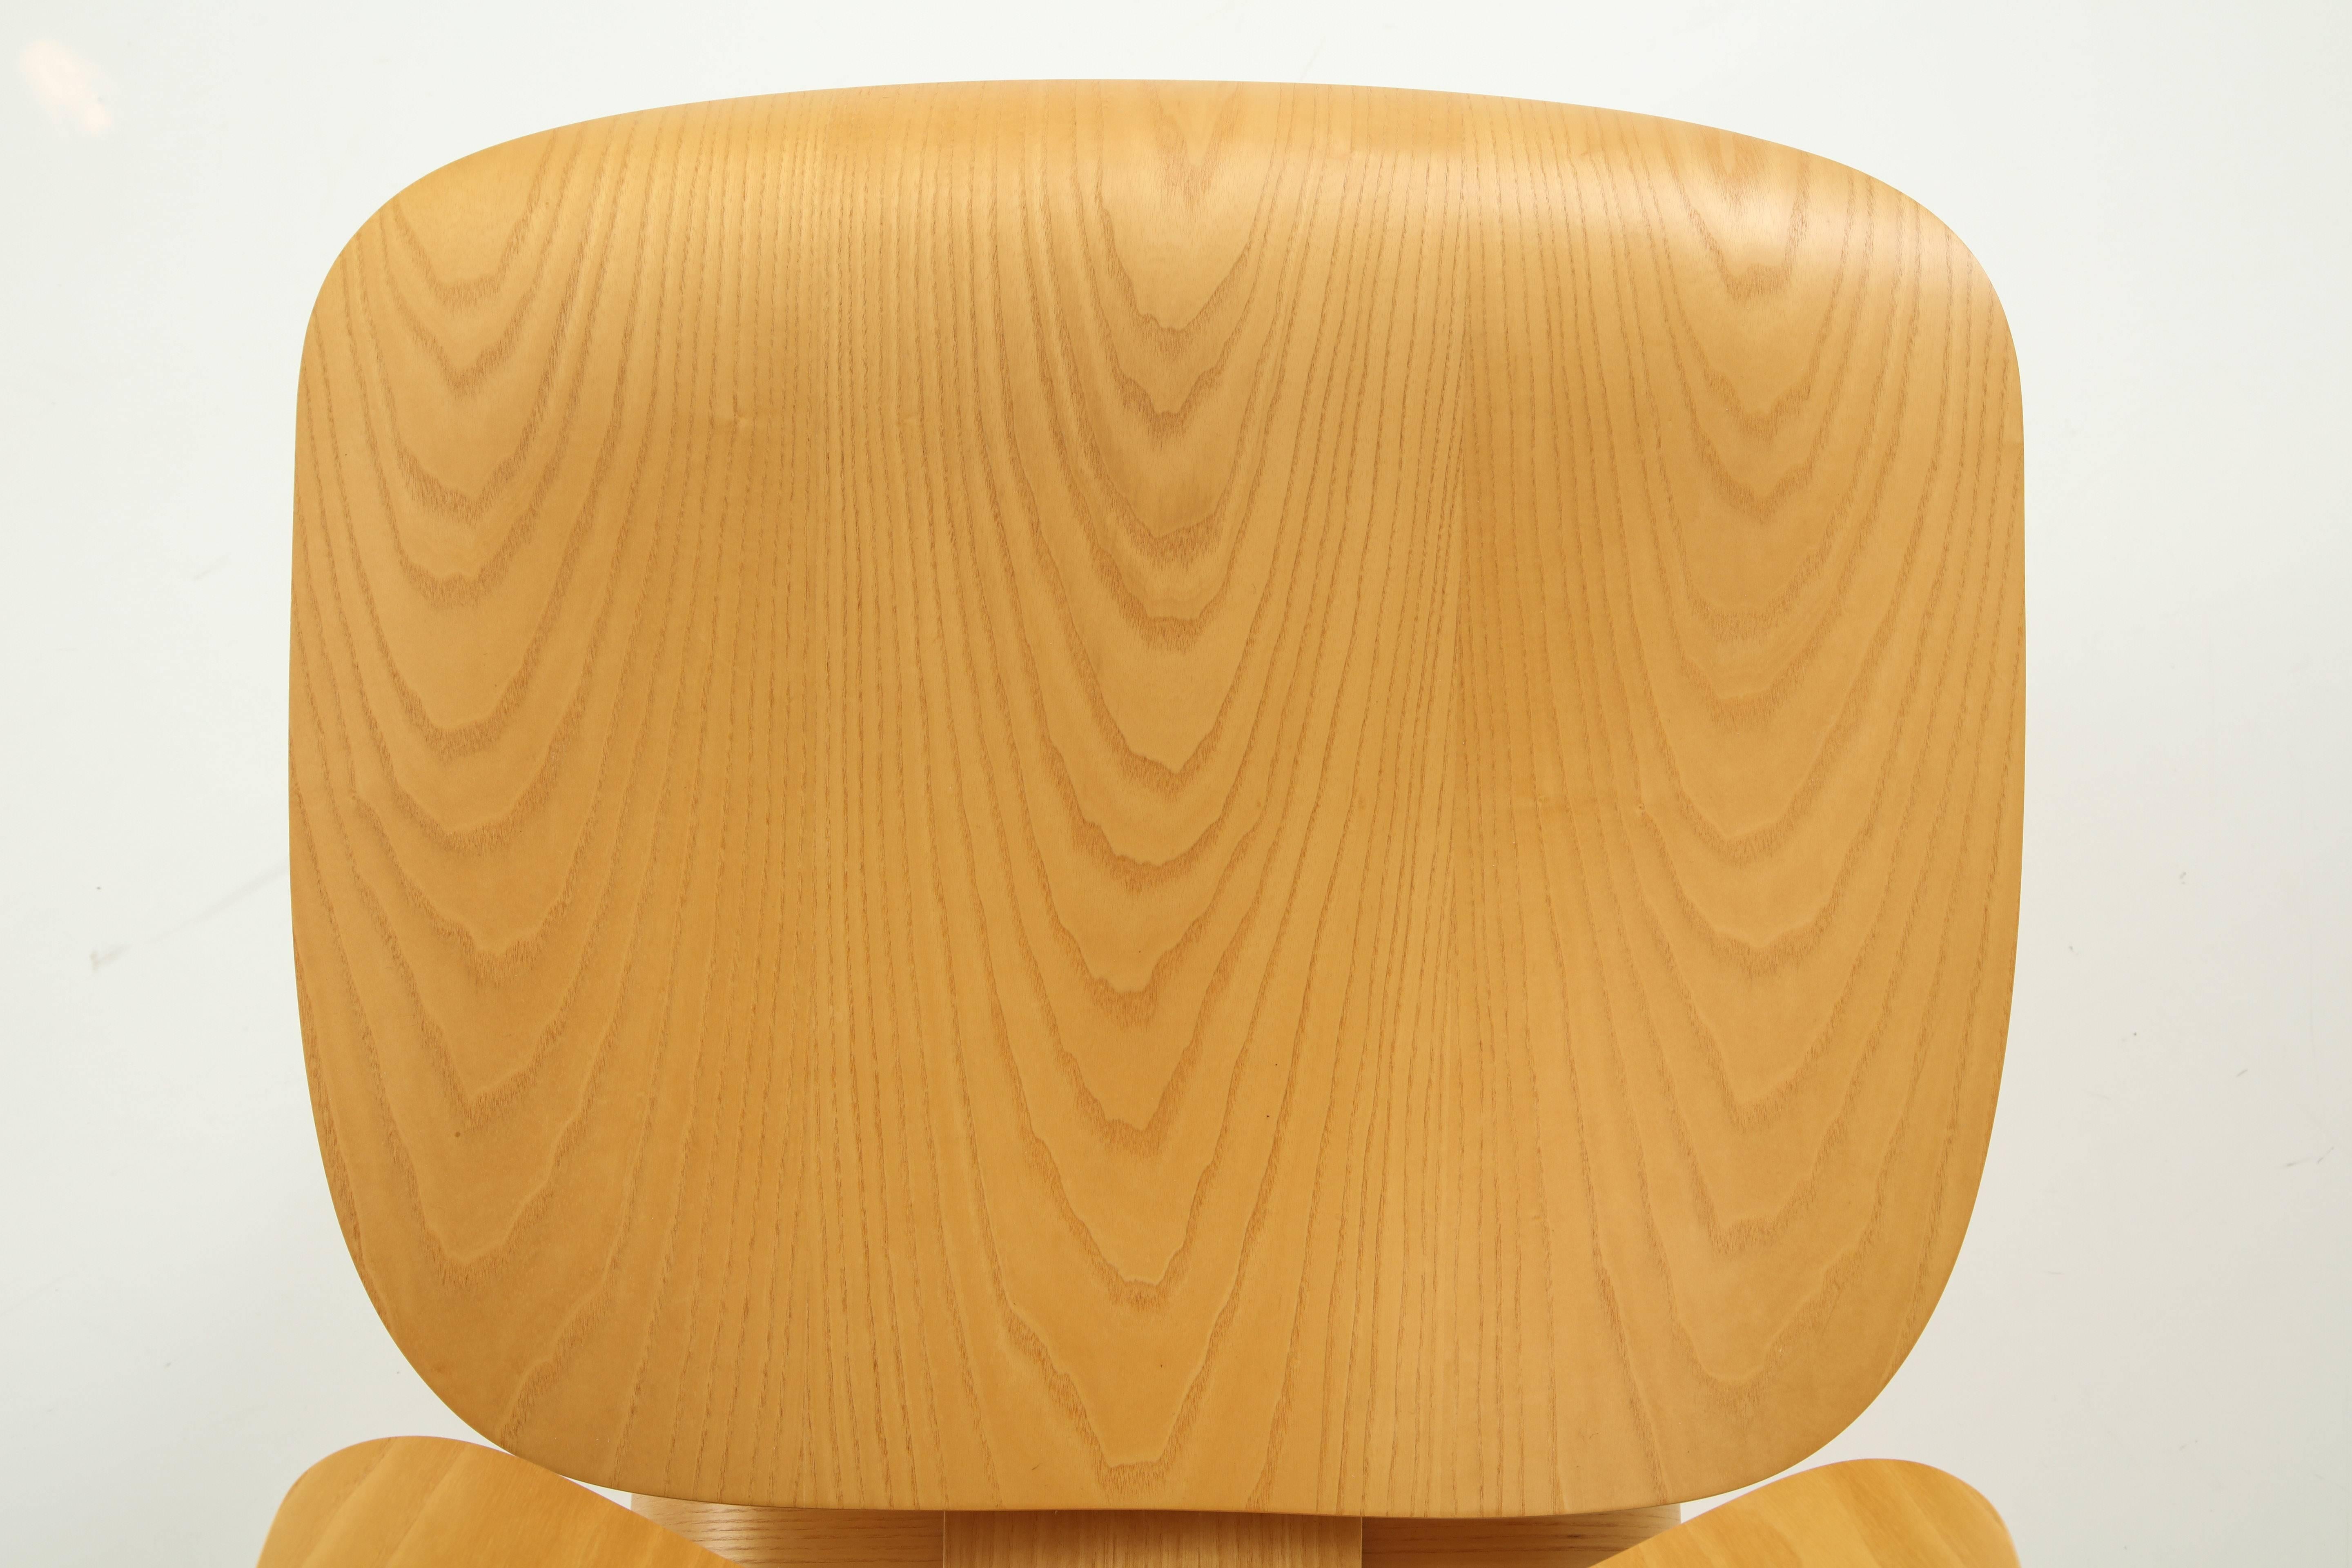 LCW by Charles Eames for Herman Miller 2